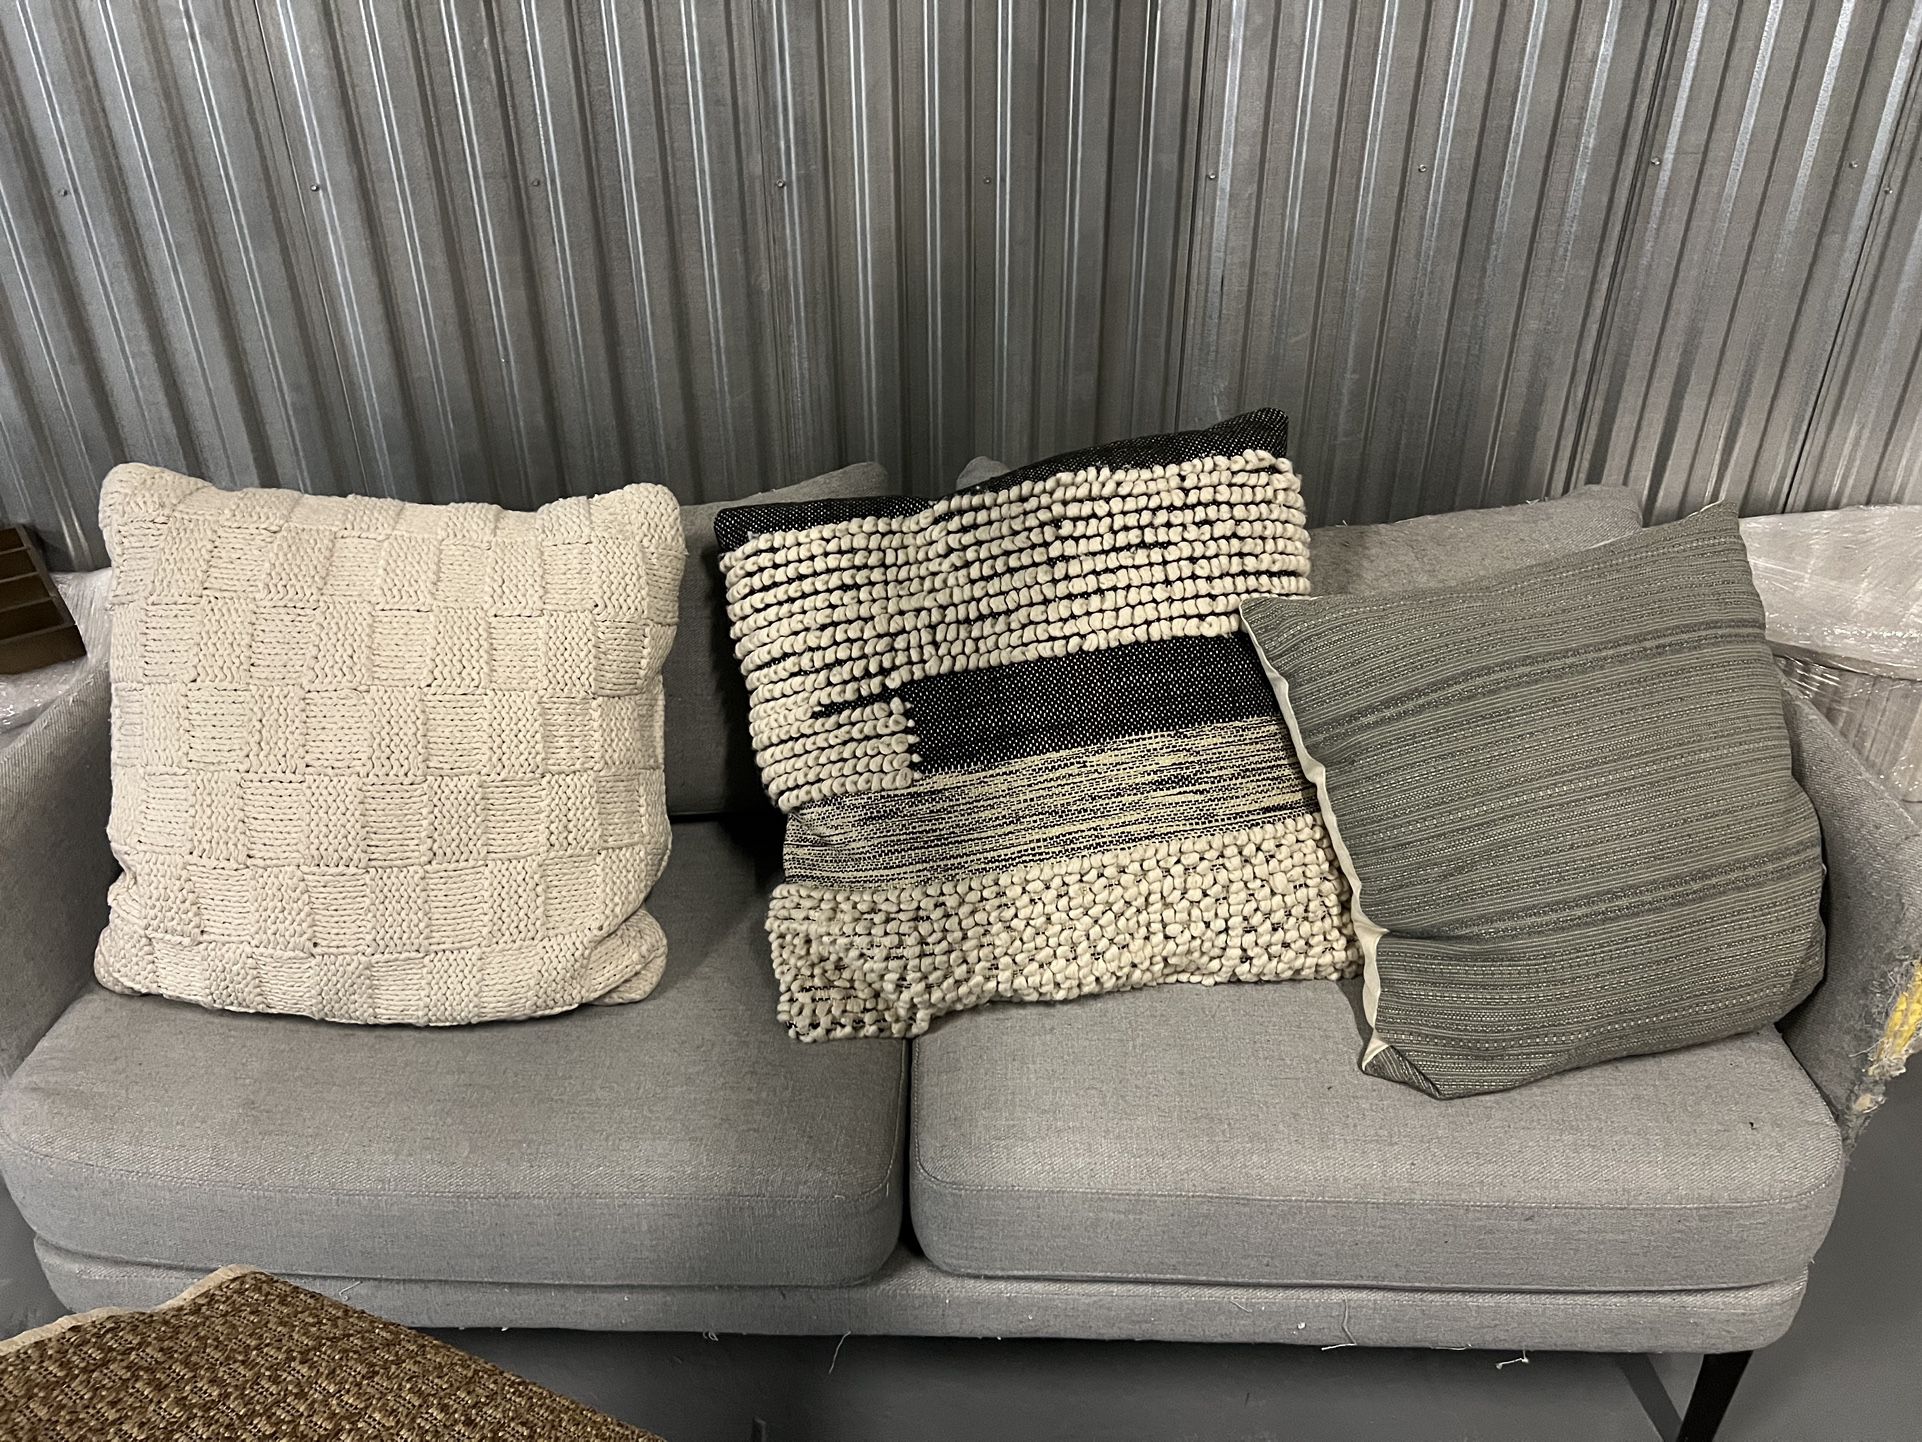 EXTRA LATGE PILLOWS FROM CB2